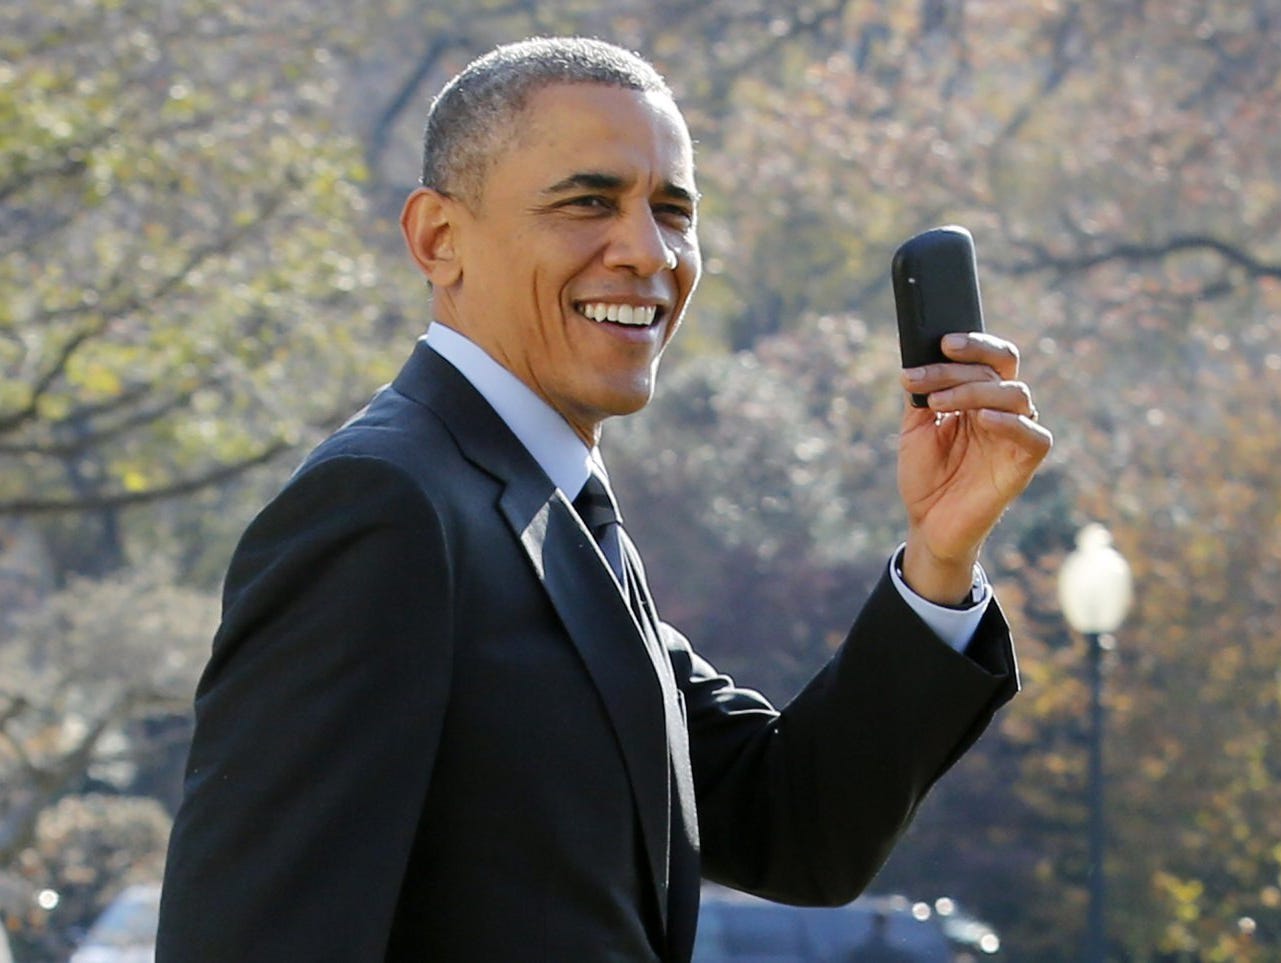 President Obama shows off his BlackBerry phone.